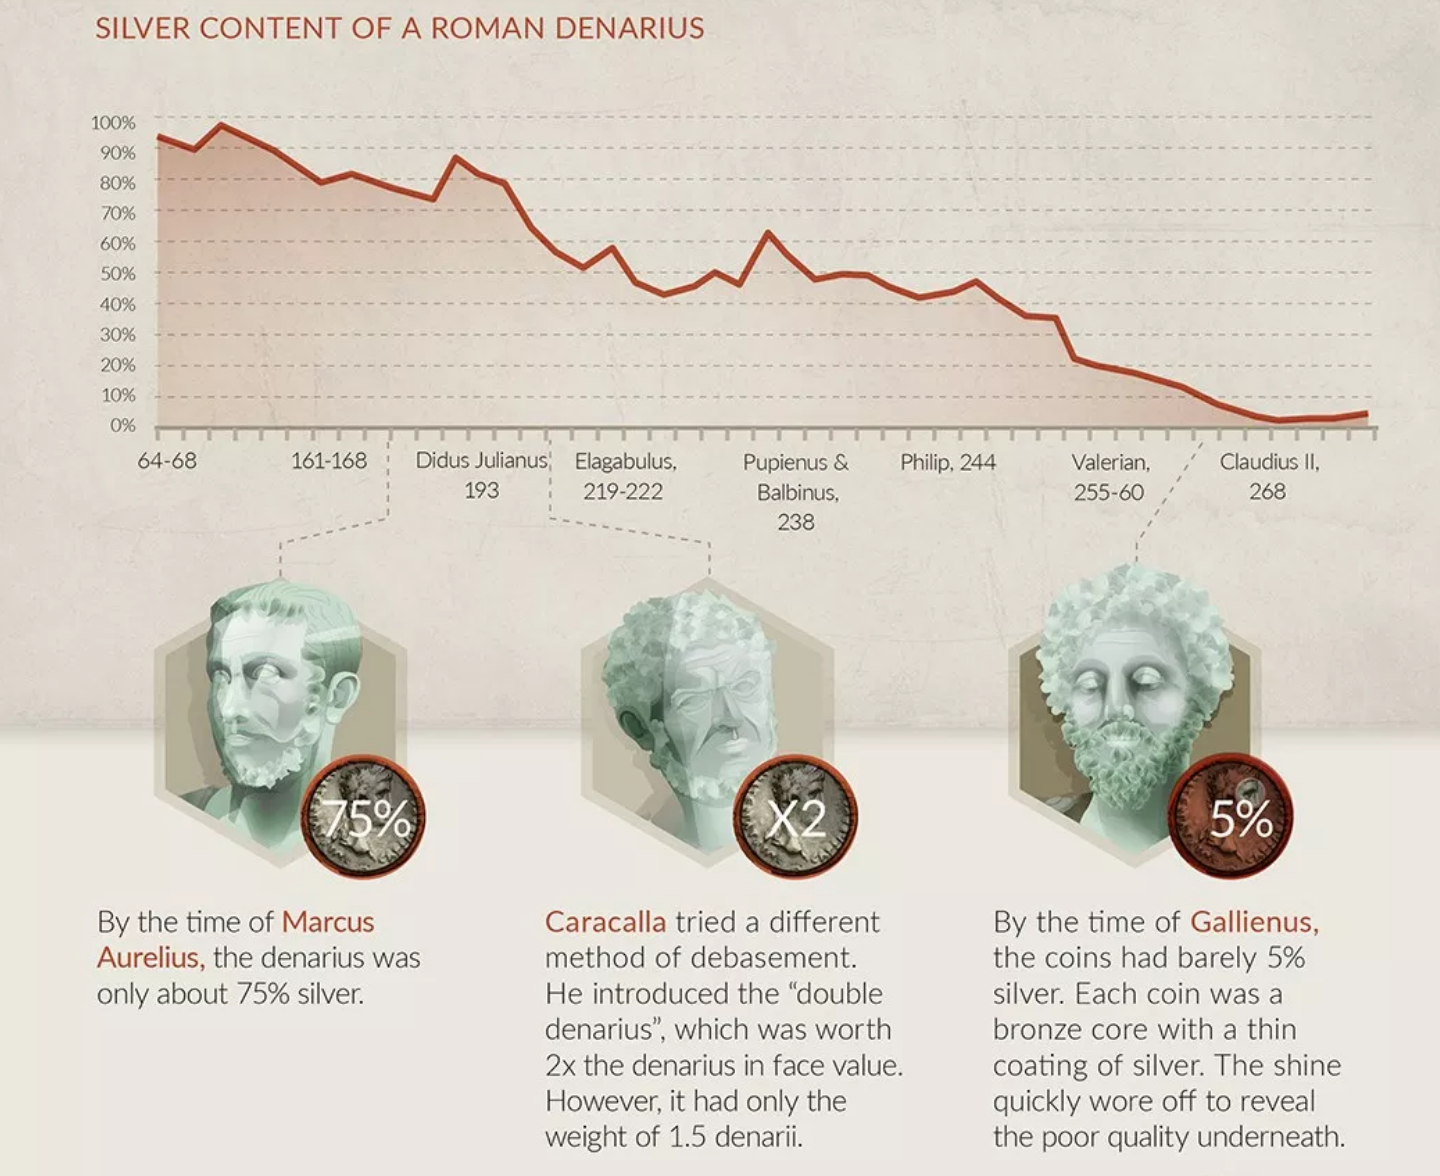 graphic image showing decline of the denarius over 200 y ears